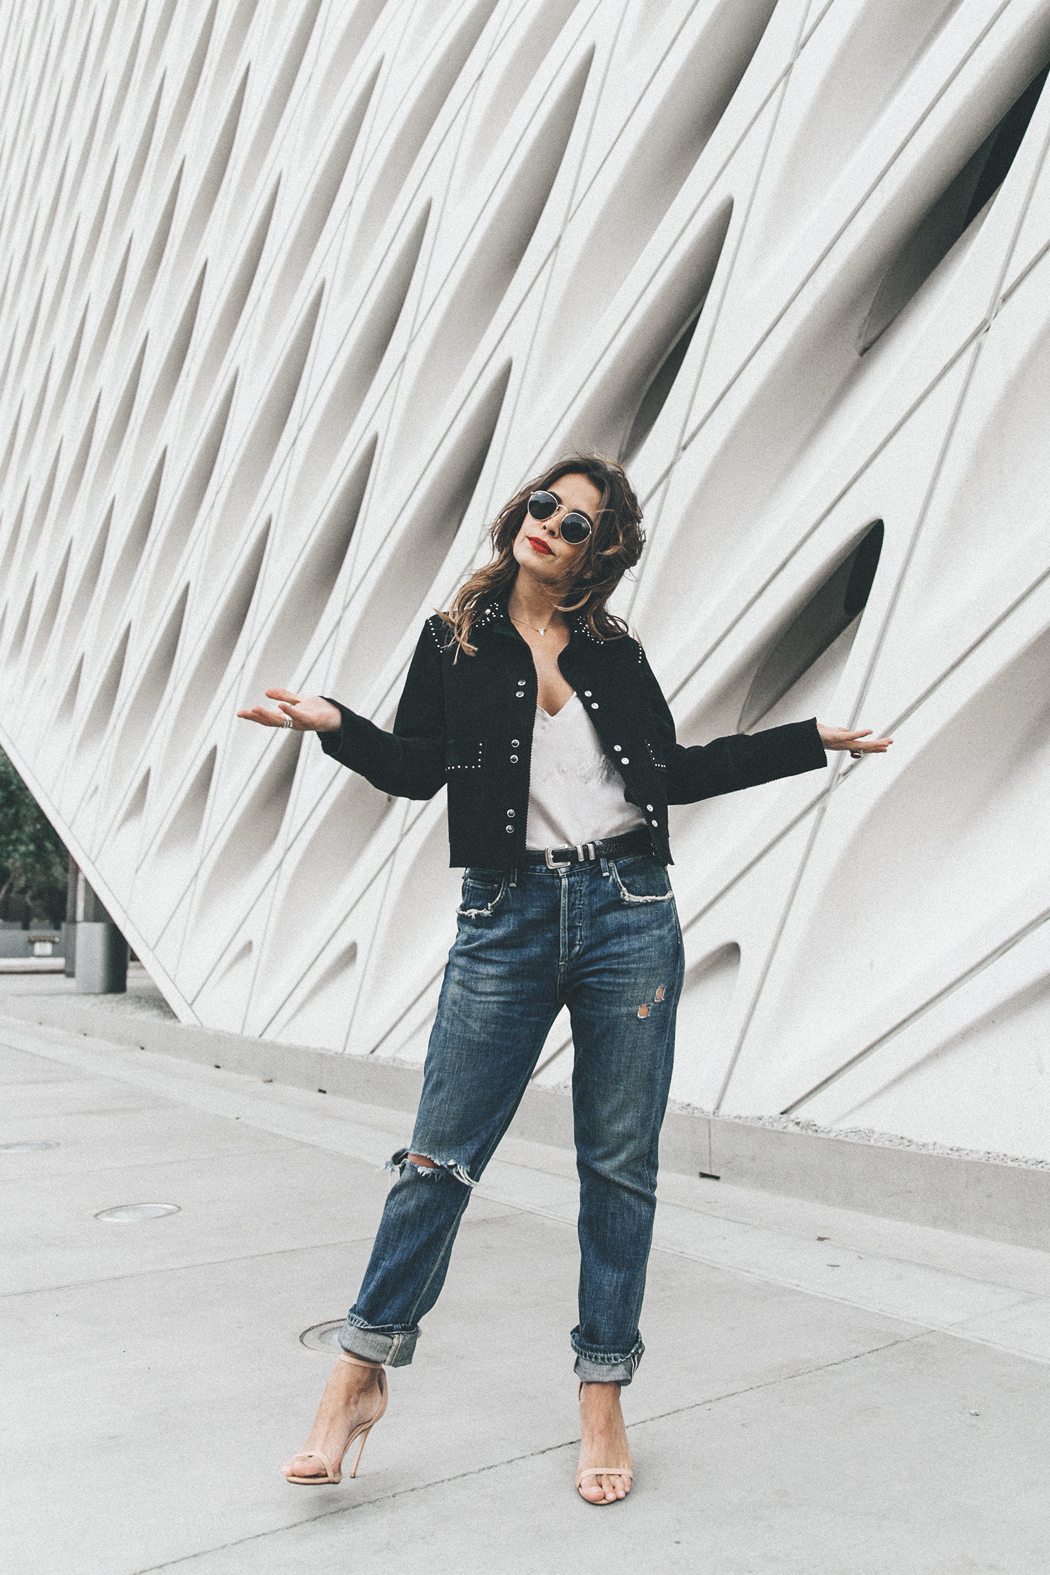 Sandro_Paris-Suede_Jacket-Citizen_OF_Humanity_Jeans-Raye_Sandals-The_Broad-Downtown_Los_Angeles-Outfit-Street_Style-40